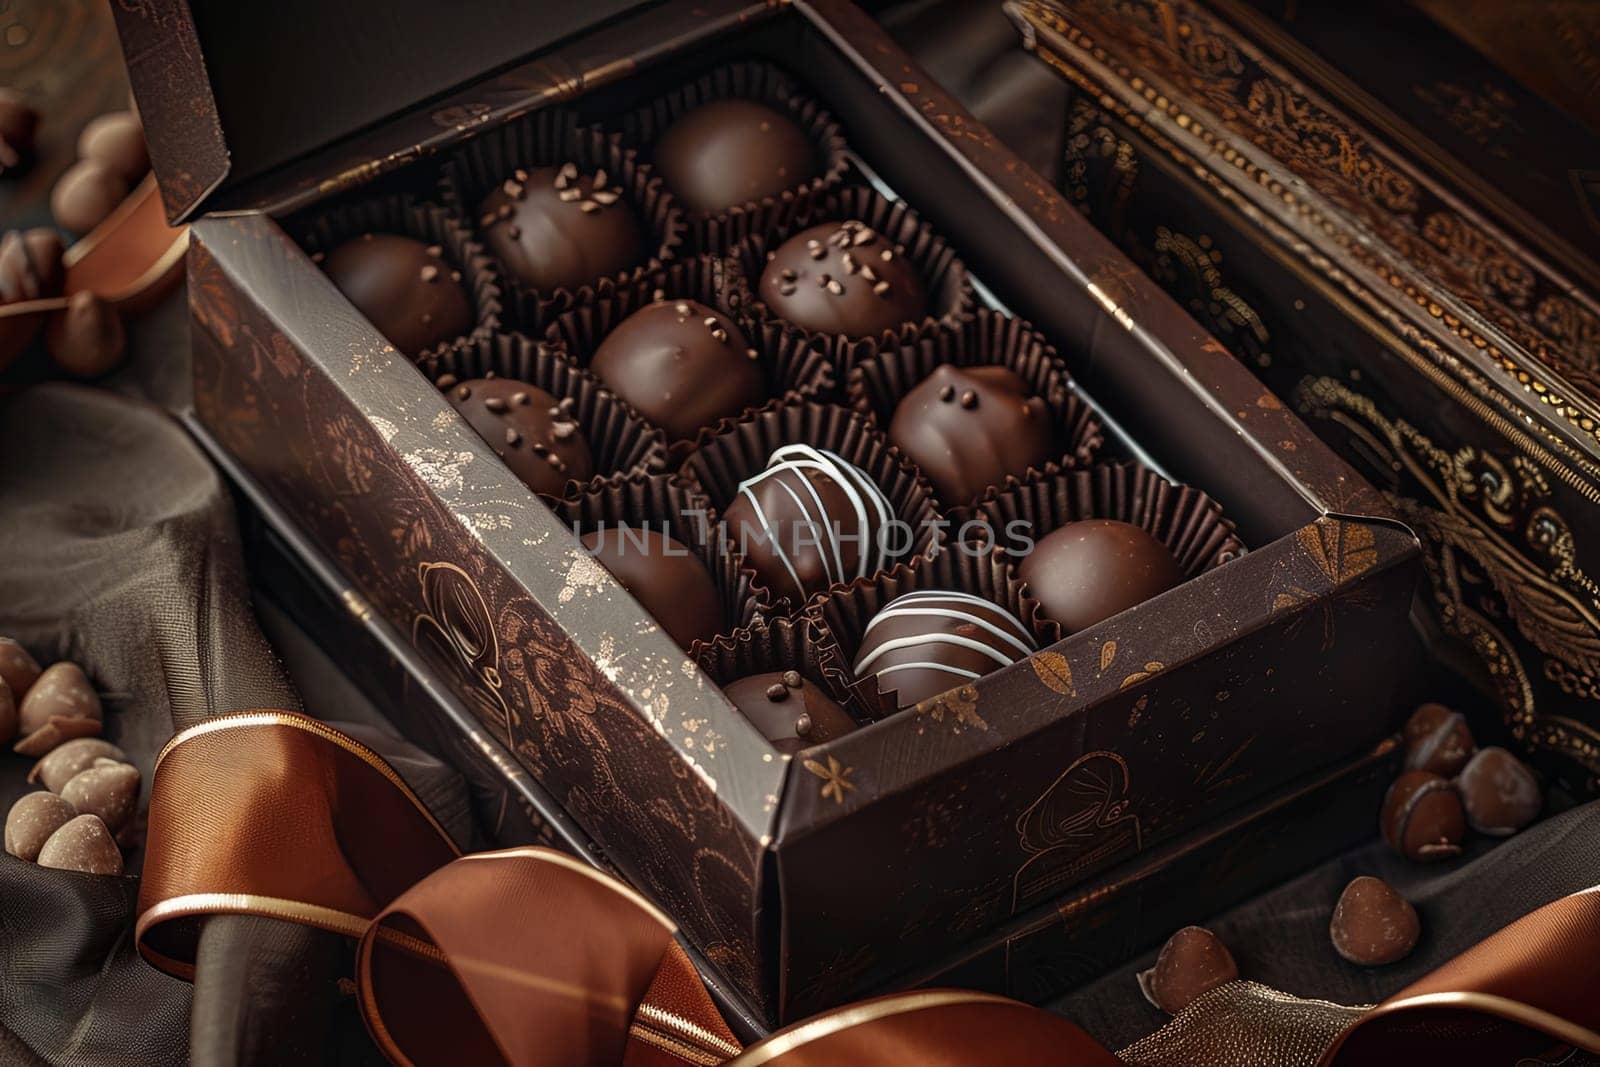 A luxurious box of chocolate truffles with ribbons on top of a table.